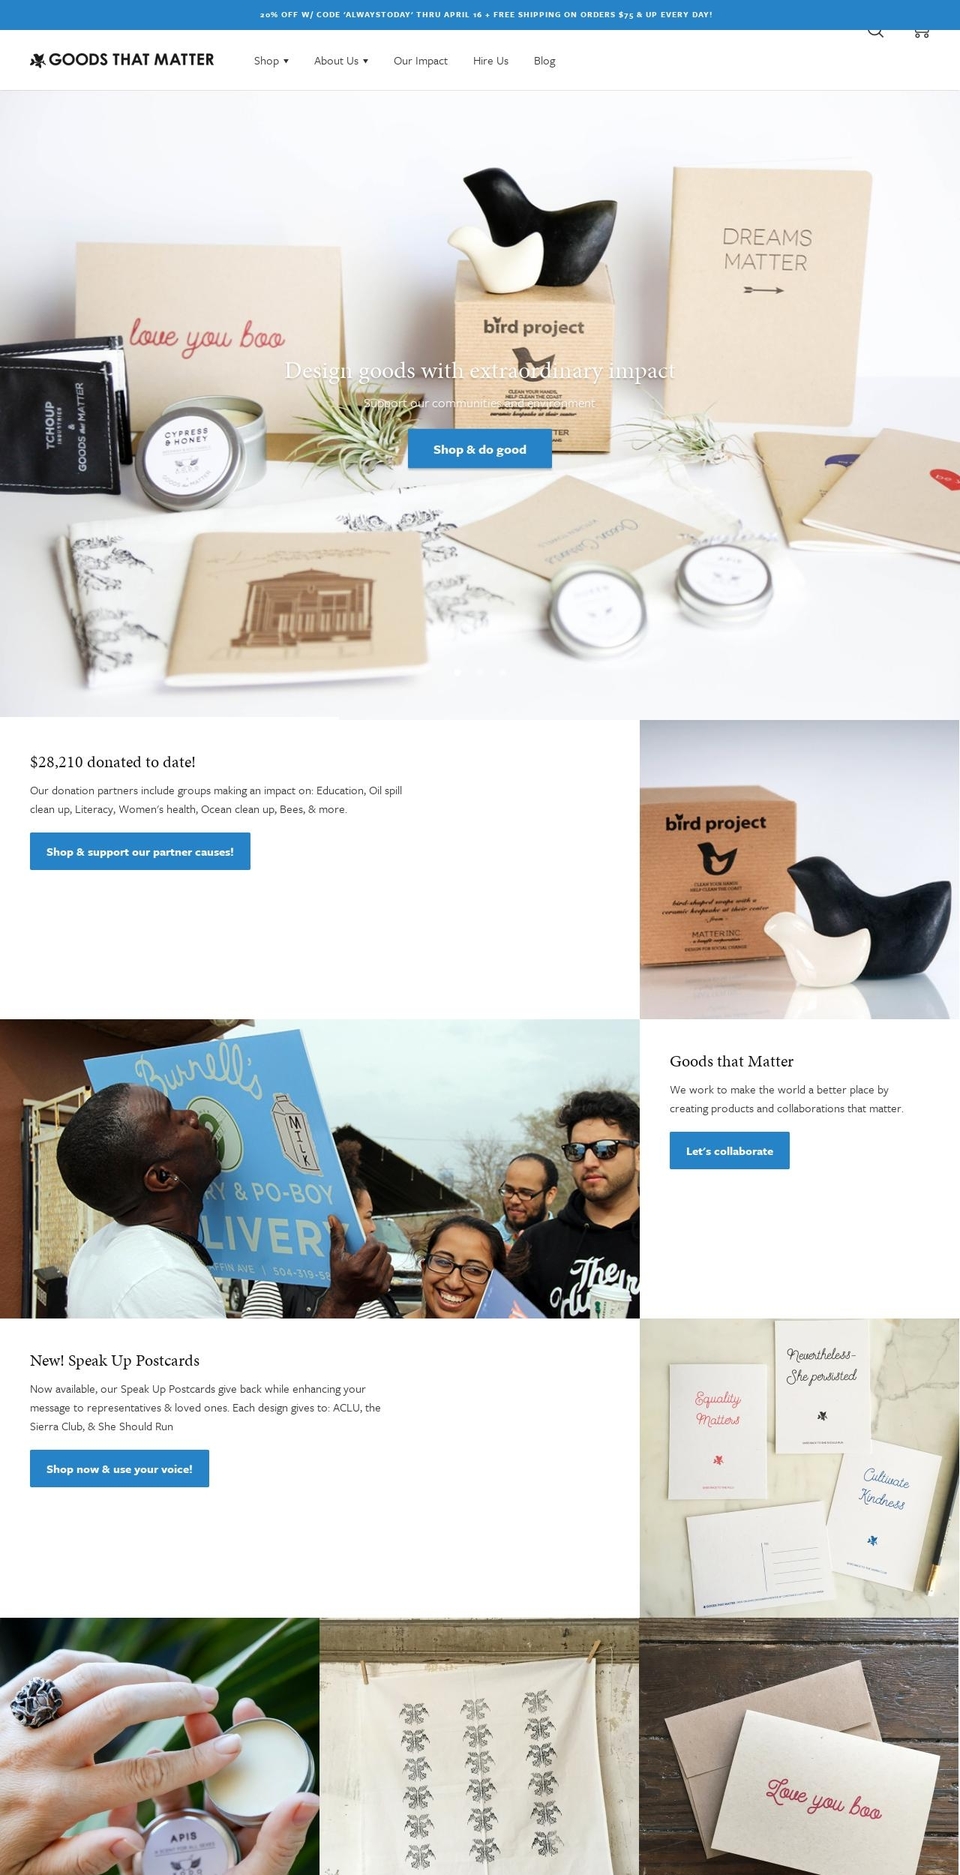 Ira Shopify theme site example birdproject.org